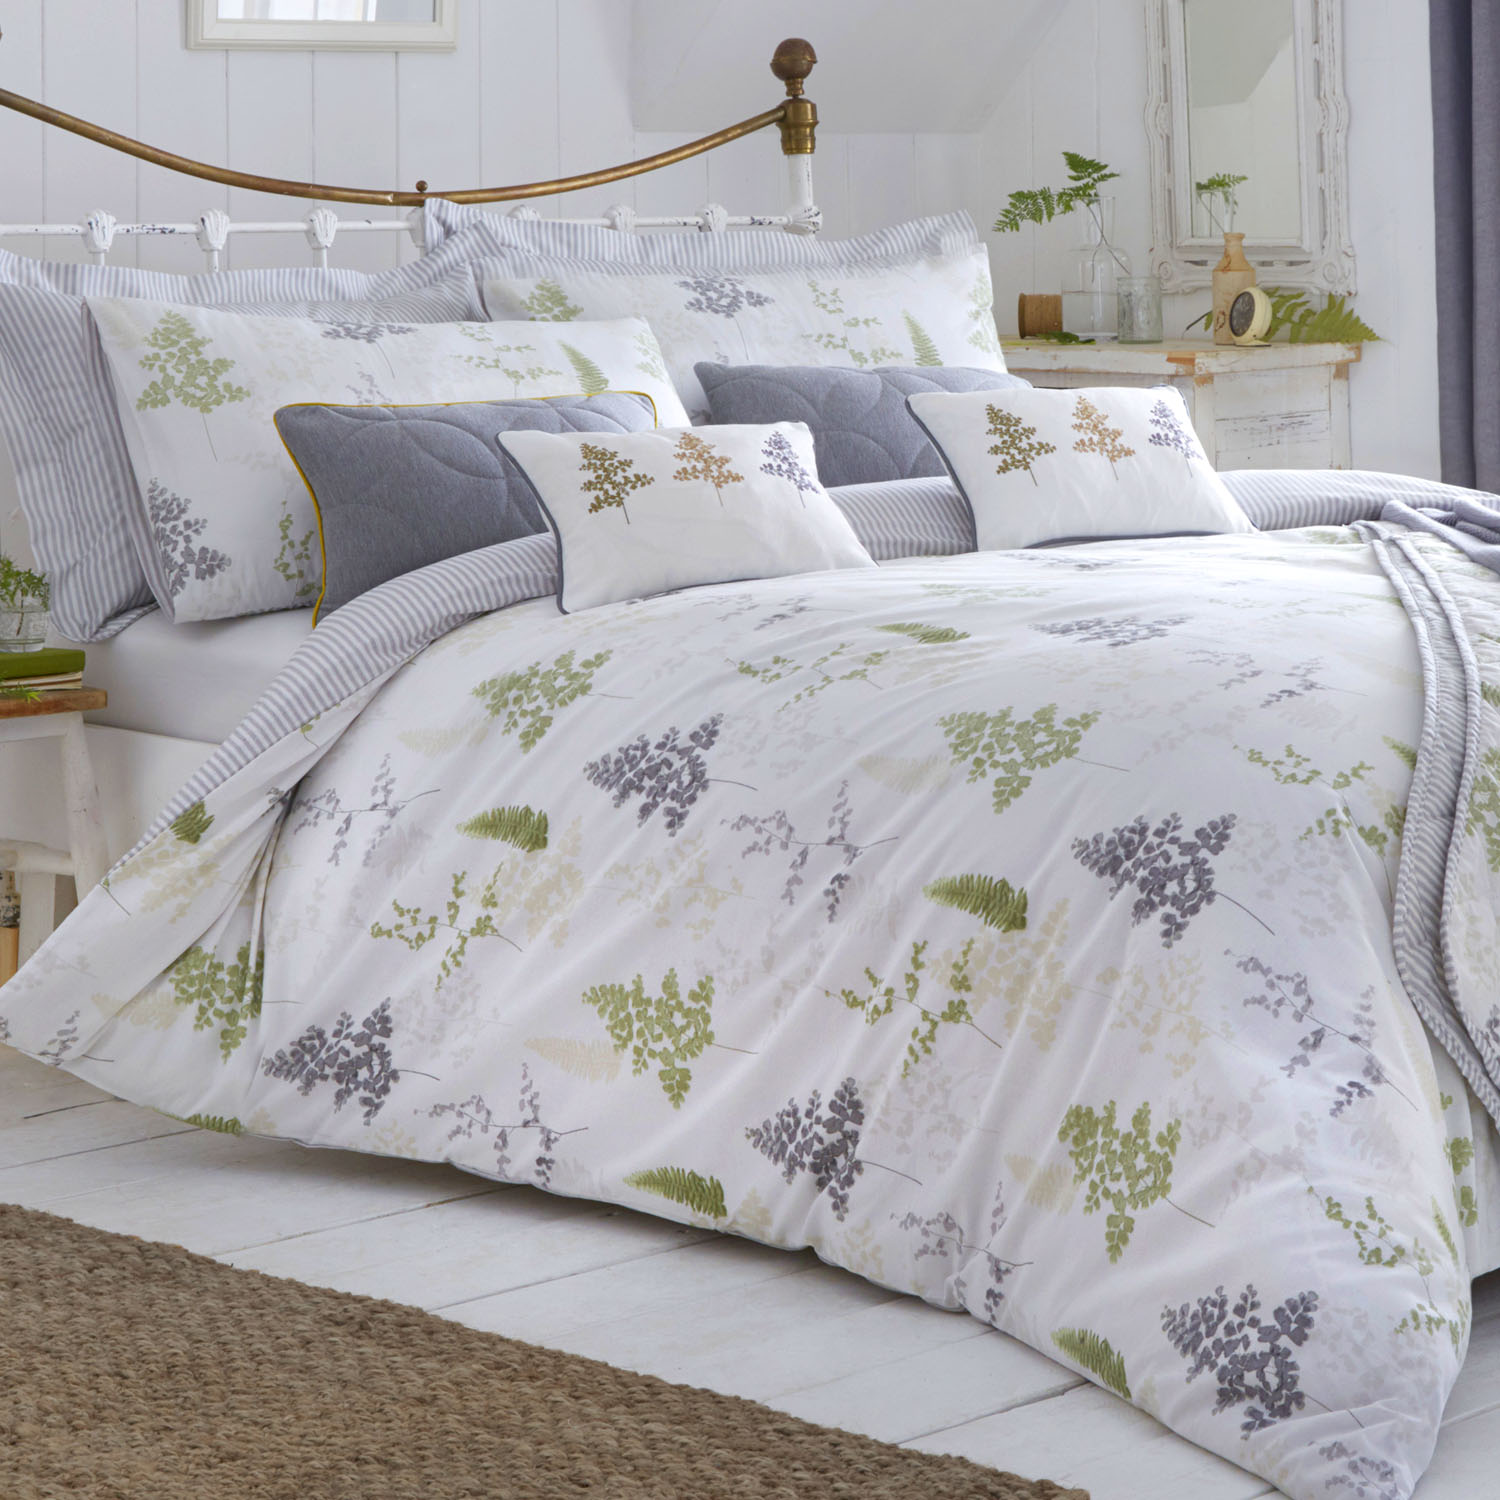 Dreams Drapes Linden Fern Green And Grey Leaf Tree Duvet Cover